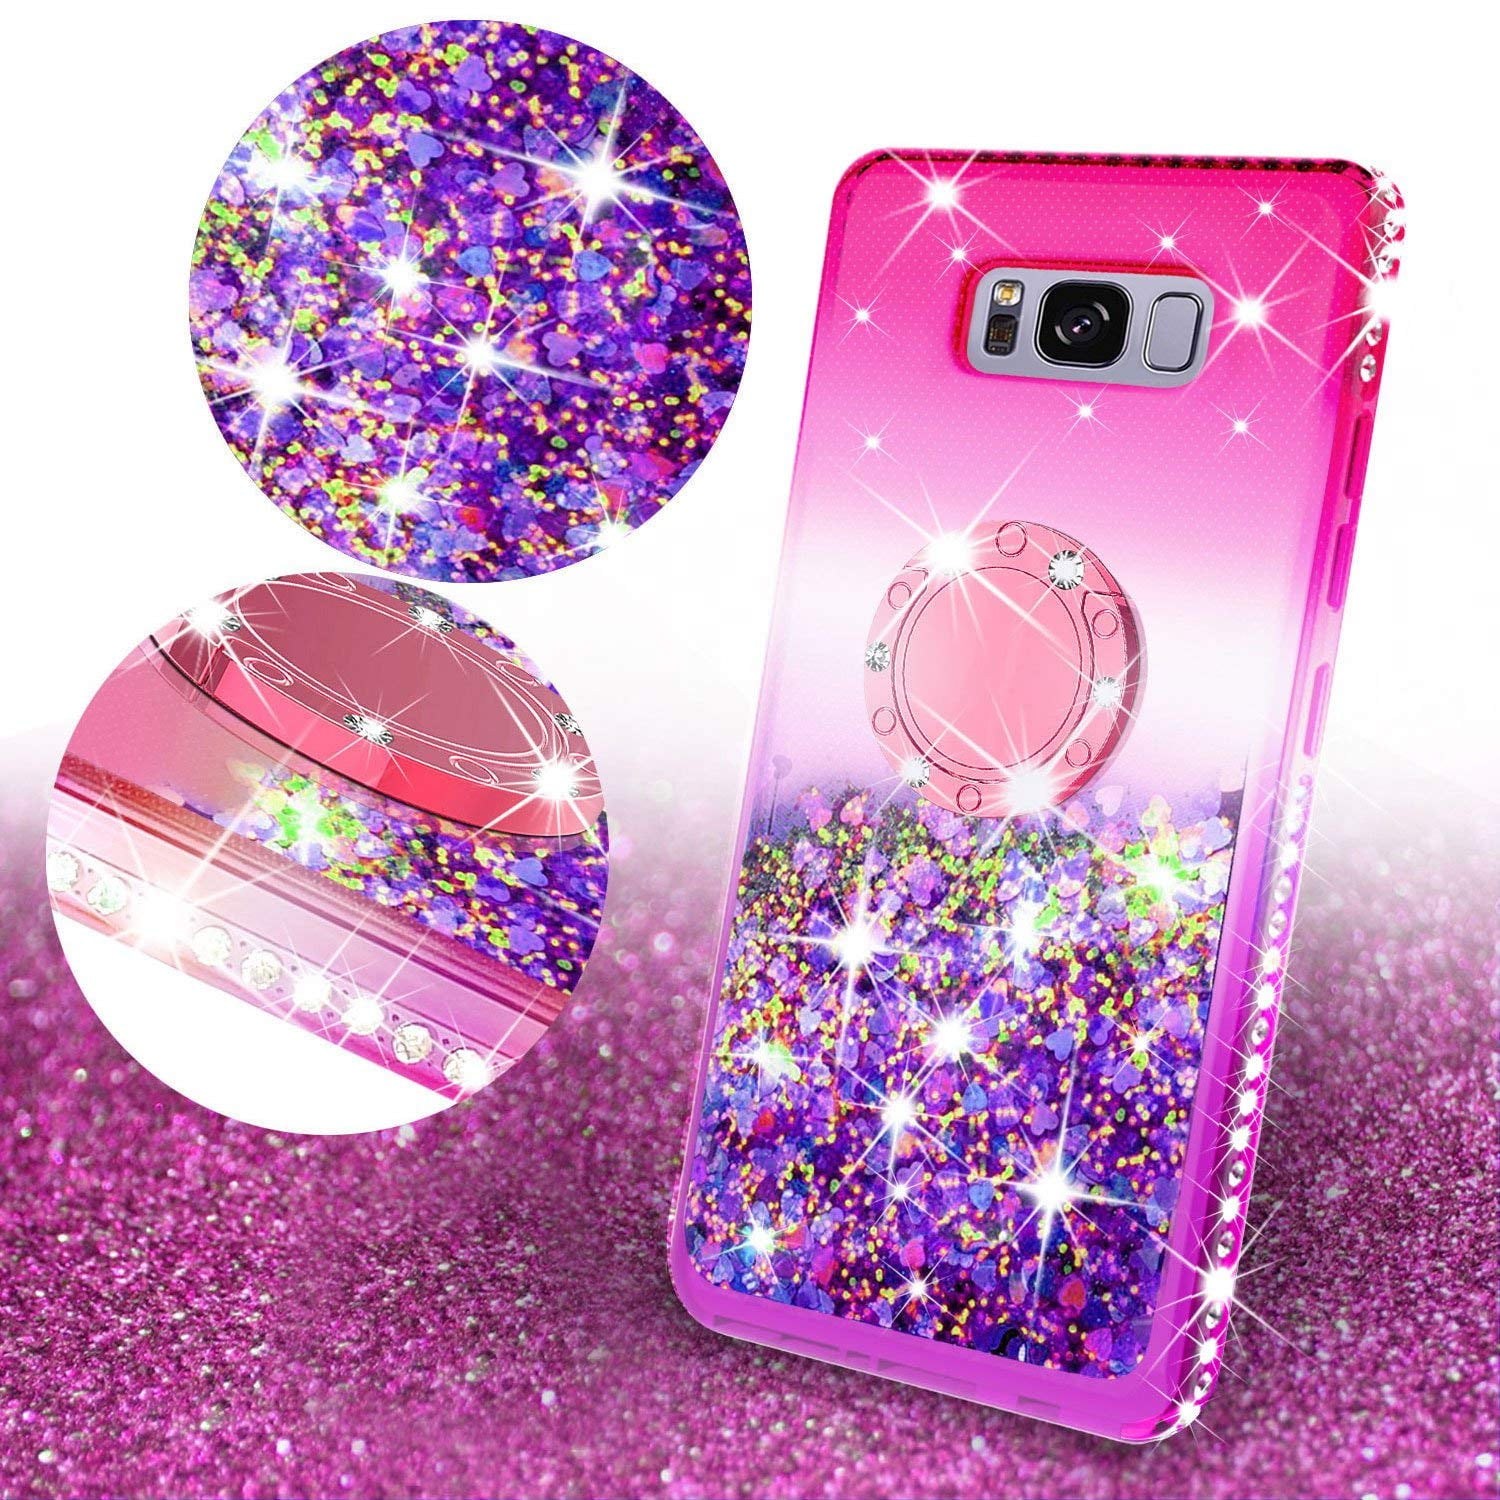 Herbests Compatible with Samsung Galaxy S8 Glitter Case Sparkly Bling Rhinestone Girls Women Cute Ultra-Thin Soft TPU Rubber Silicone Cover with Diamond Kickstand Ring Holder,Red 